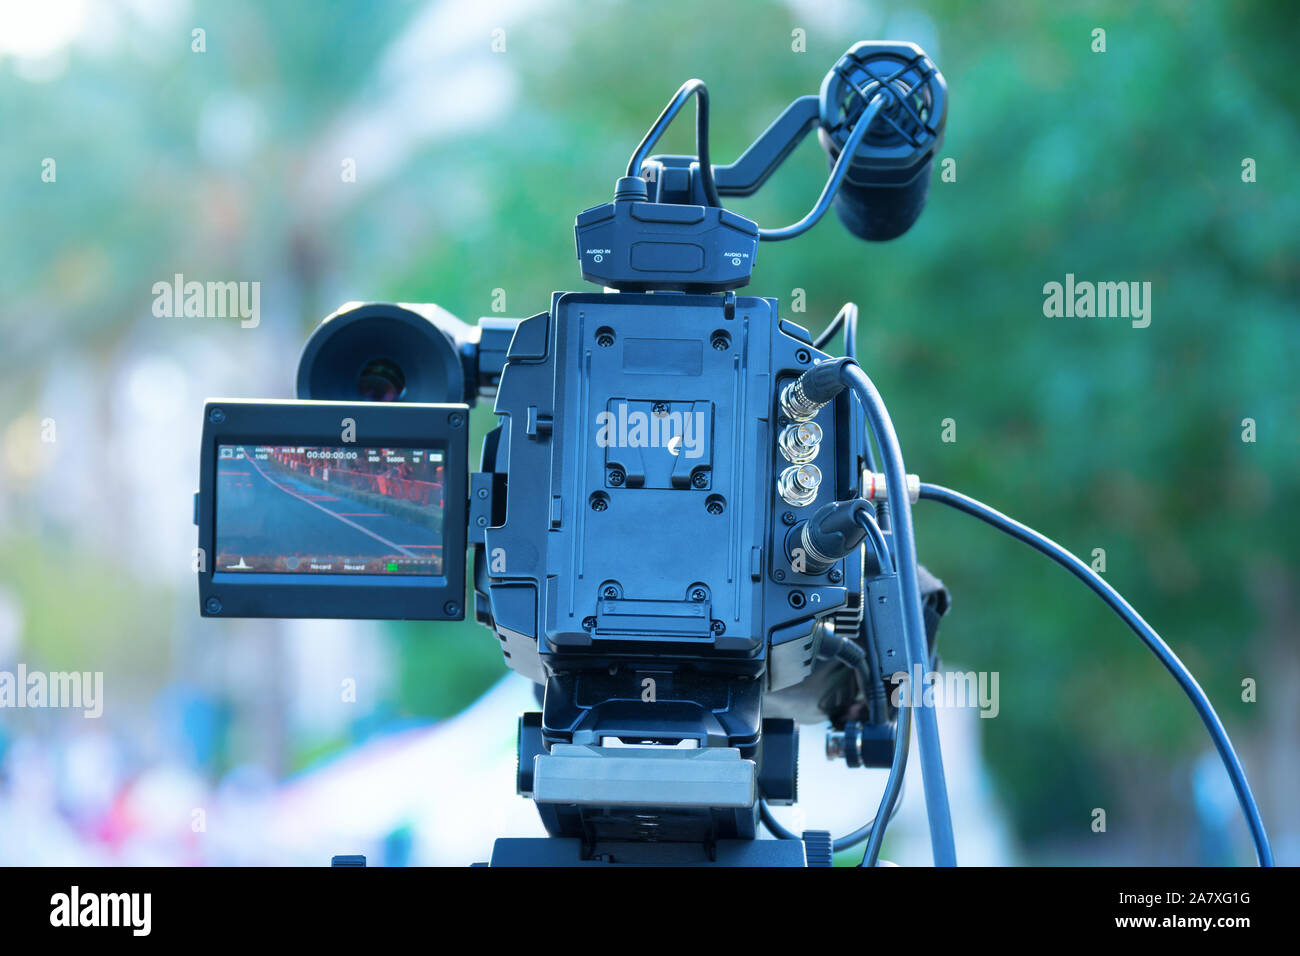 High end professional digital video camera with liquid crystal display LCD screen and microphone at an outdoor event with blurred trees in the backgro Stock Photo